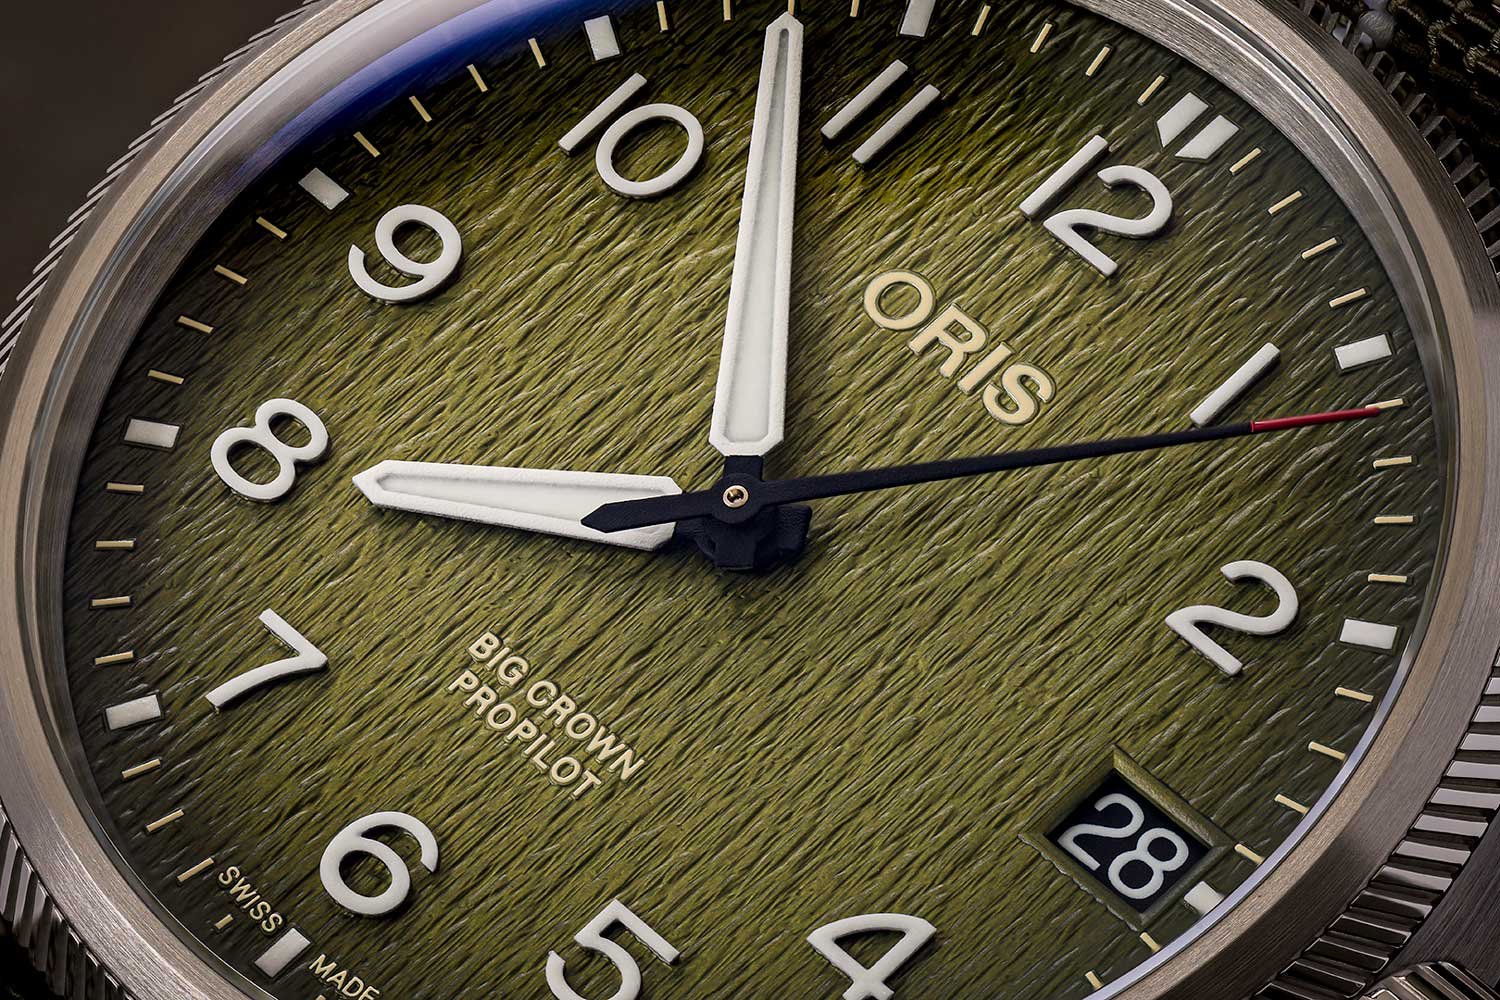 The Okavango Air Rescue Limited Edition has a gorgeous textured green dial that mimics the grasslands of the Okavango Delta.